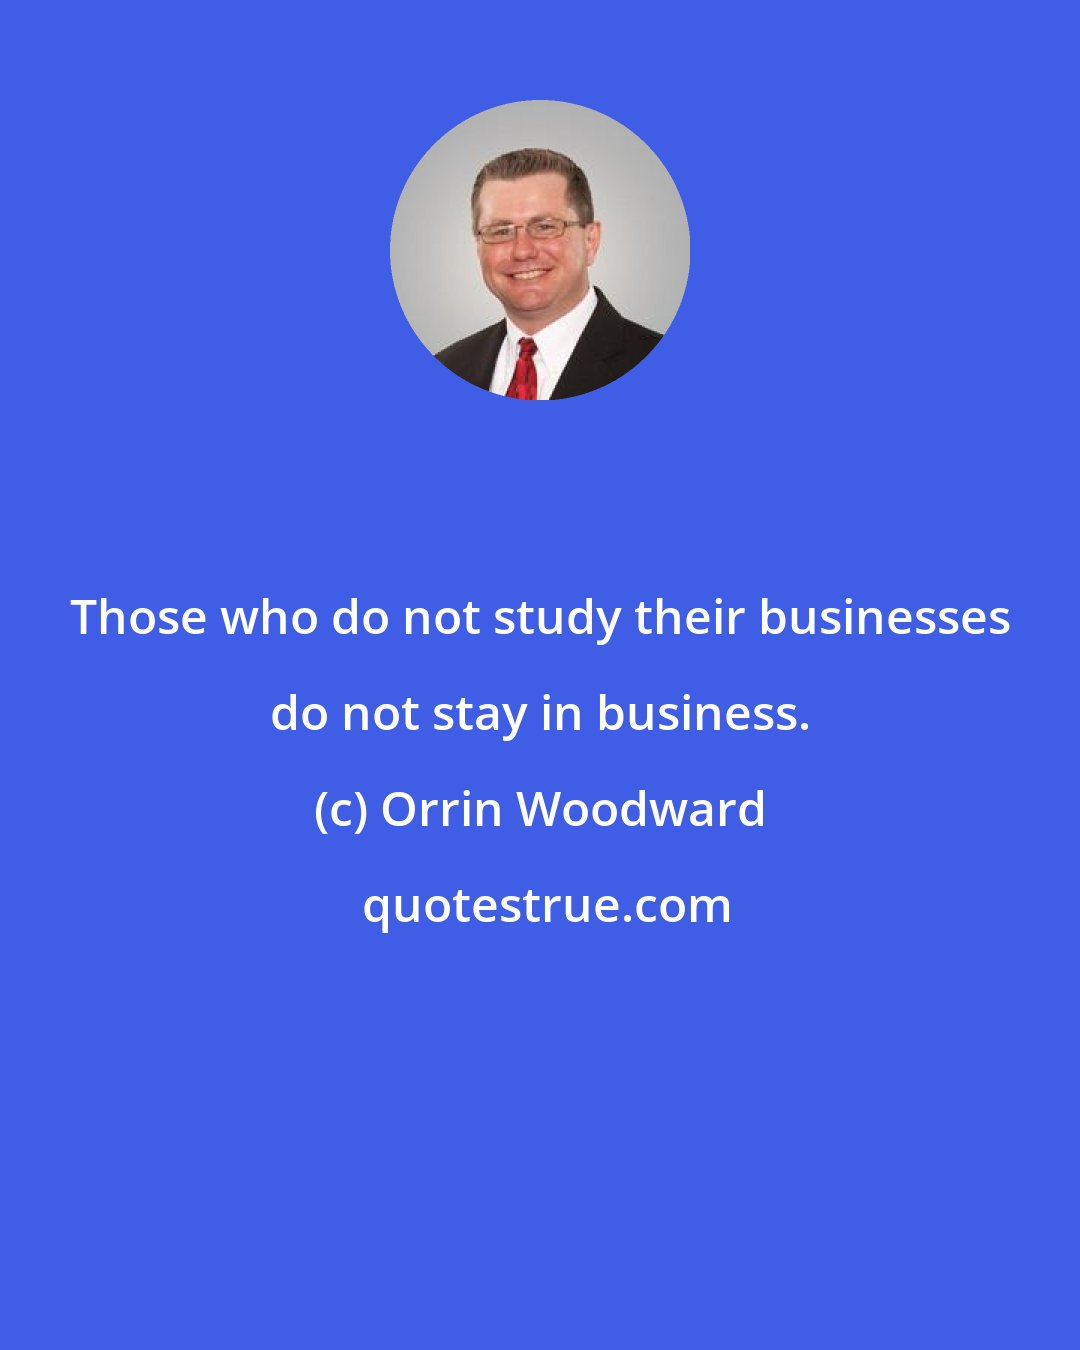 Orrin Woodward: Those who do not study their businesses do not stay in business.